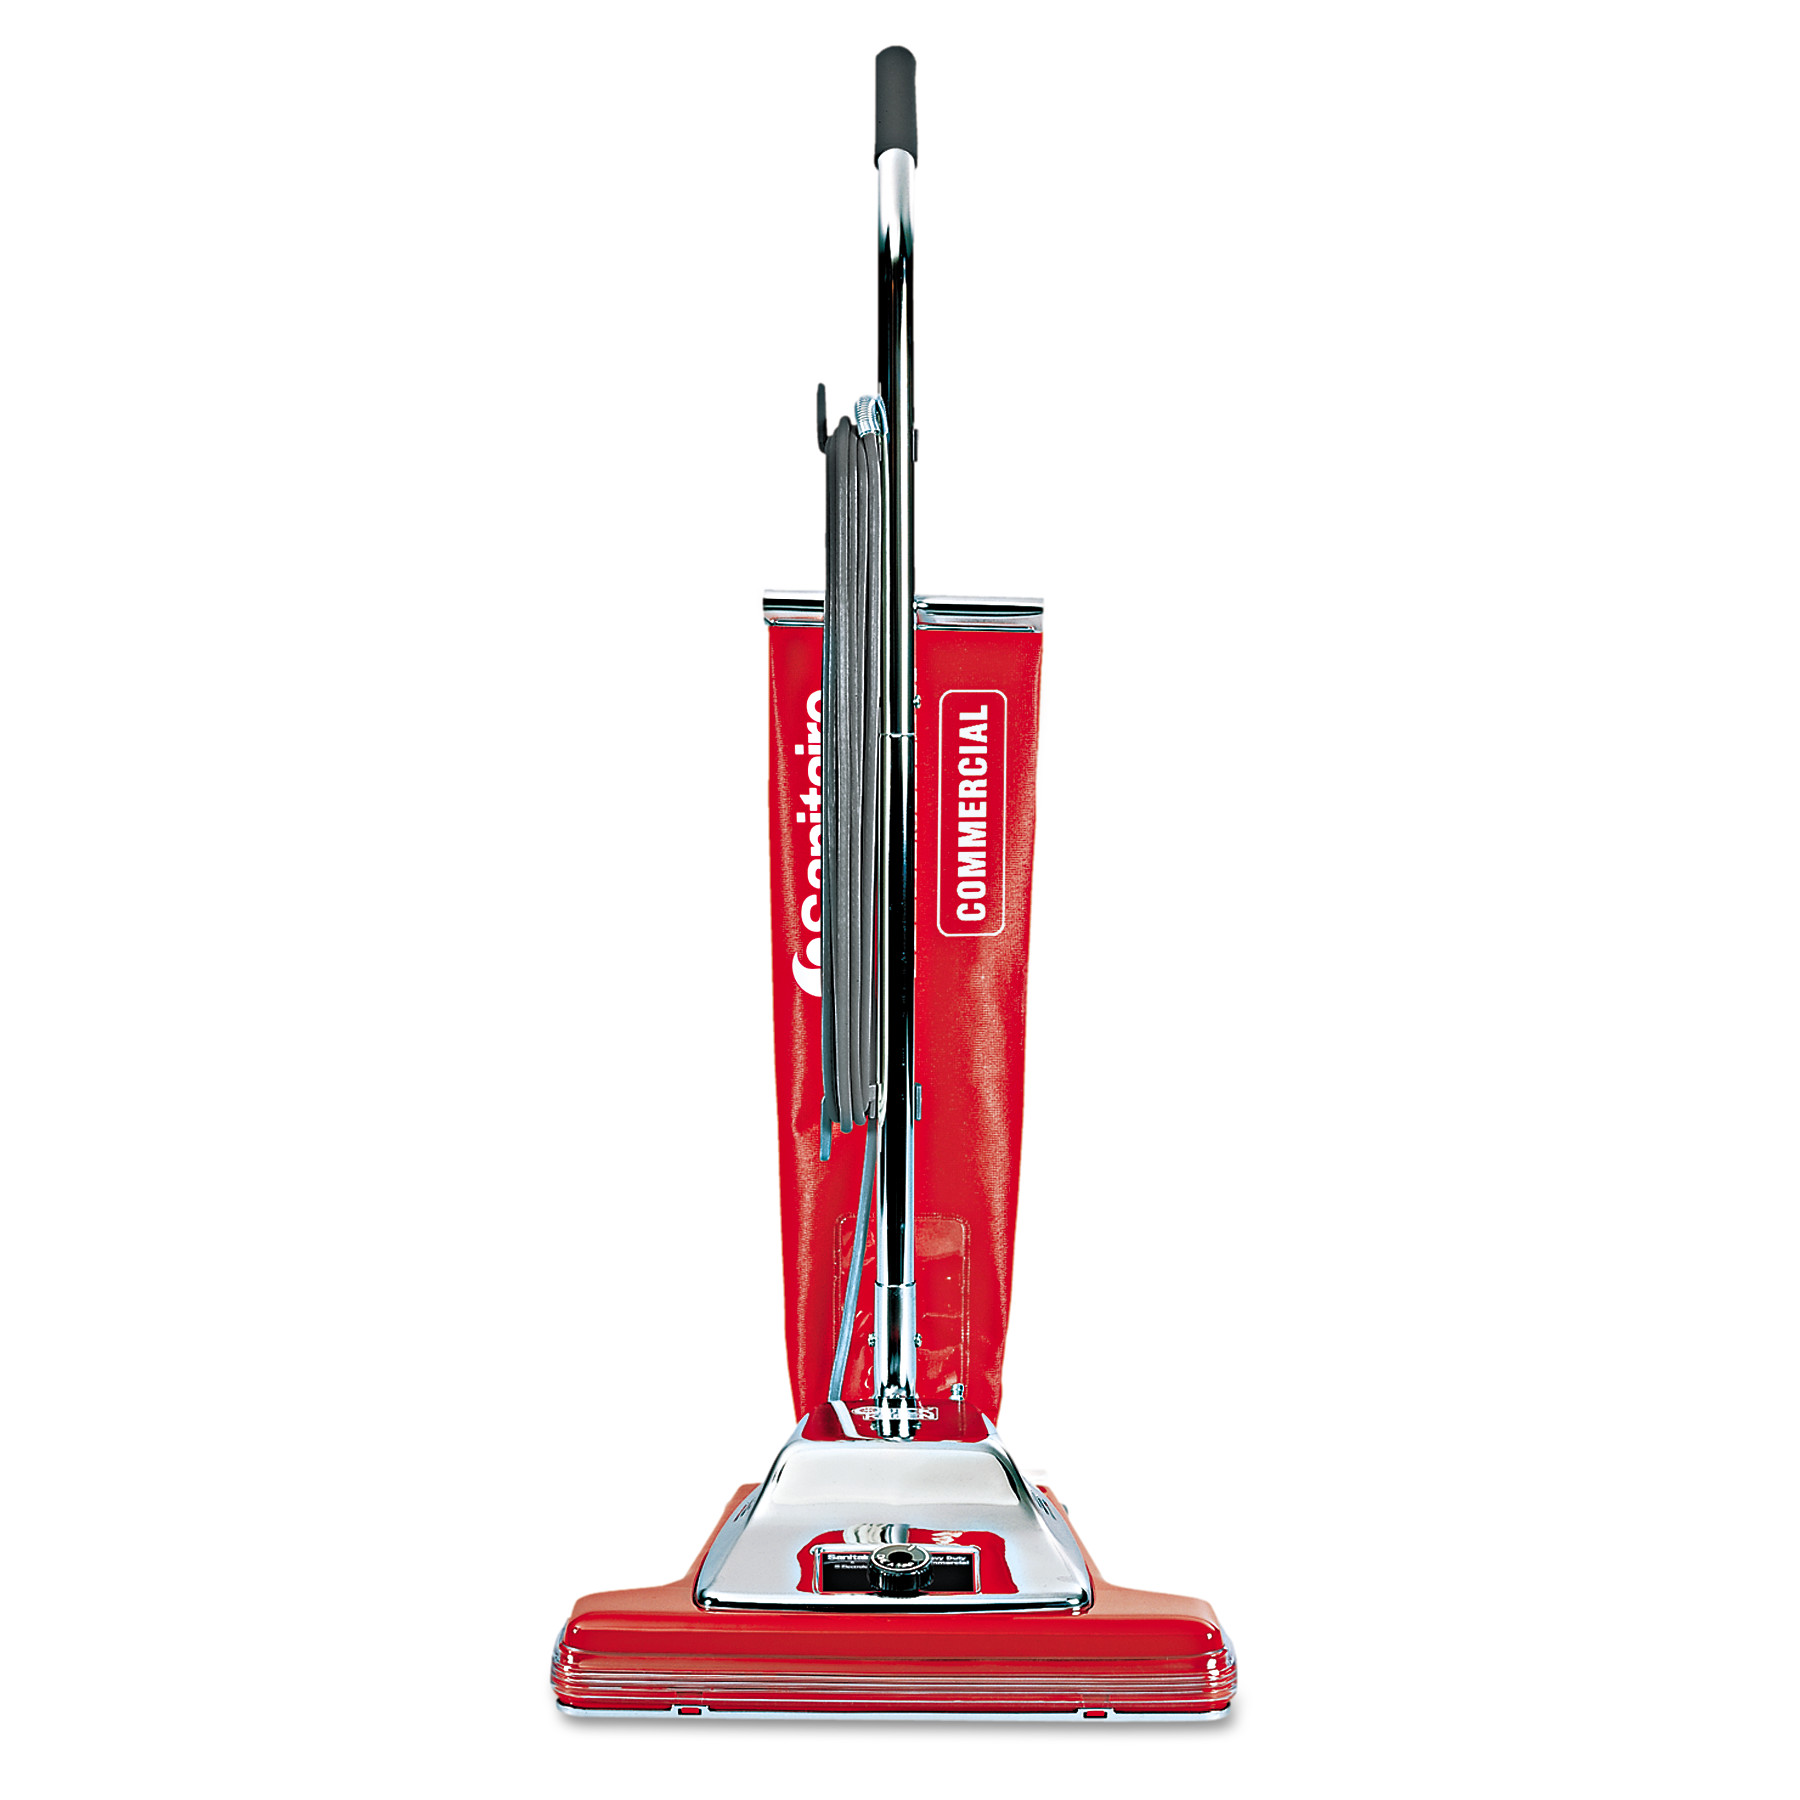 Sanitaire Widetrack Commercial Upright Vacuum w/Vibra Groomer, 16" Path, 18.5lb, Red - image 1 of 3